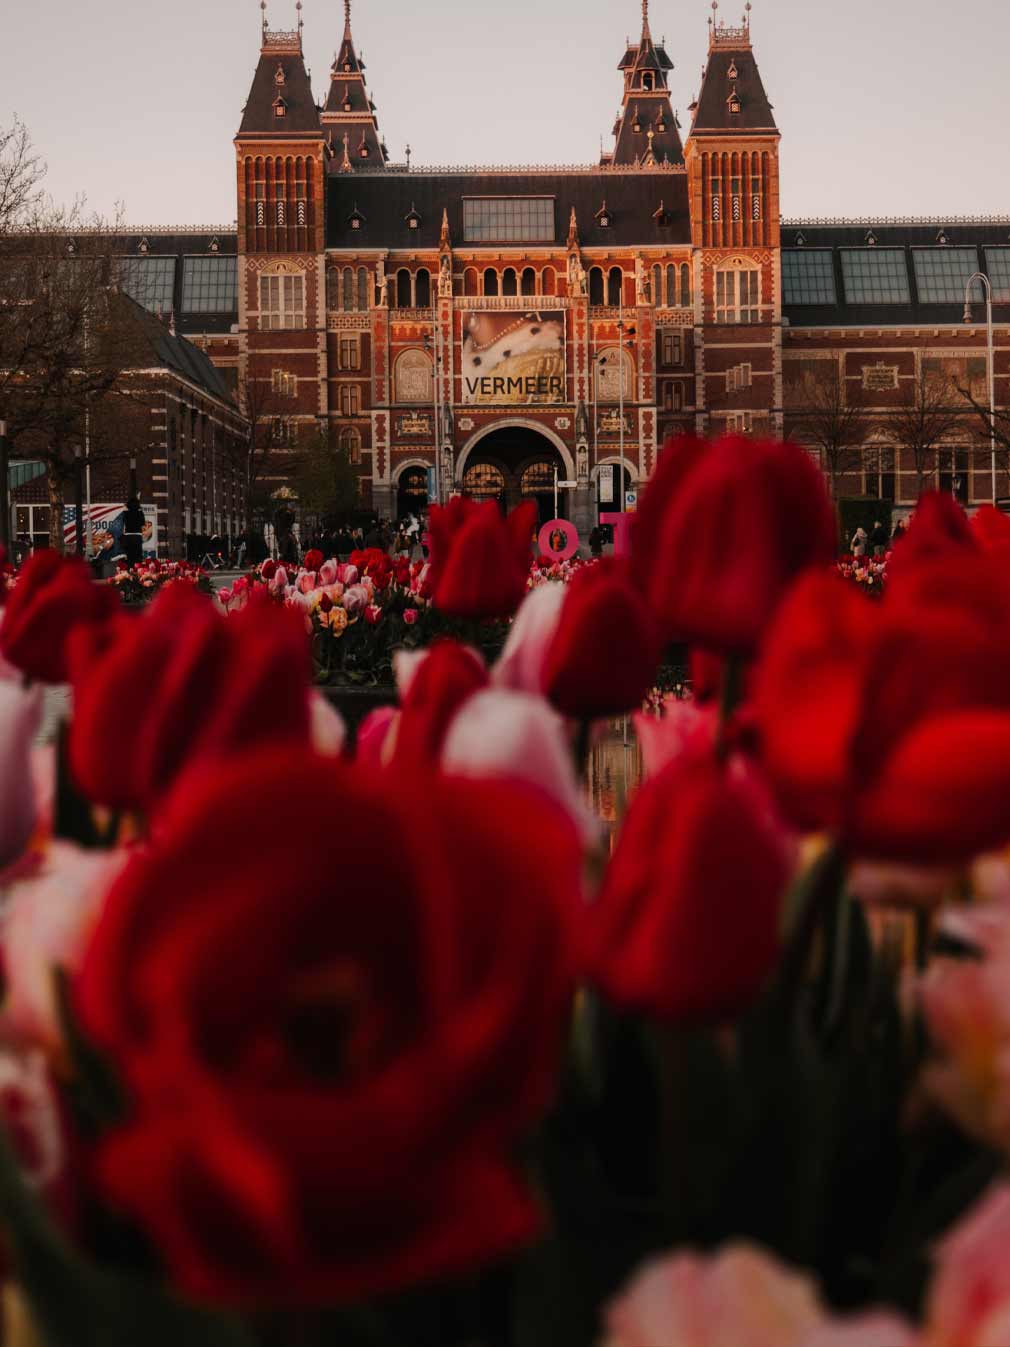 Red flowers in front of the Rijksmuseum in Amsterdam 